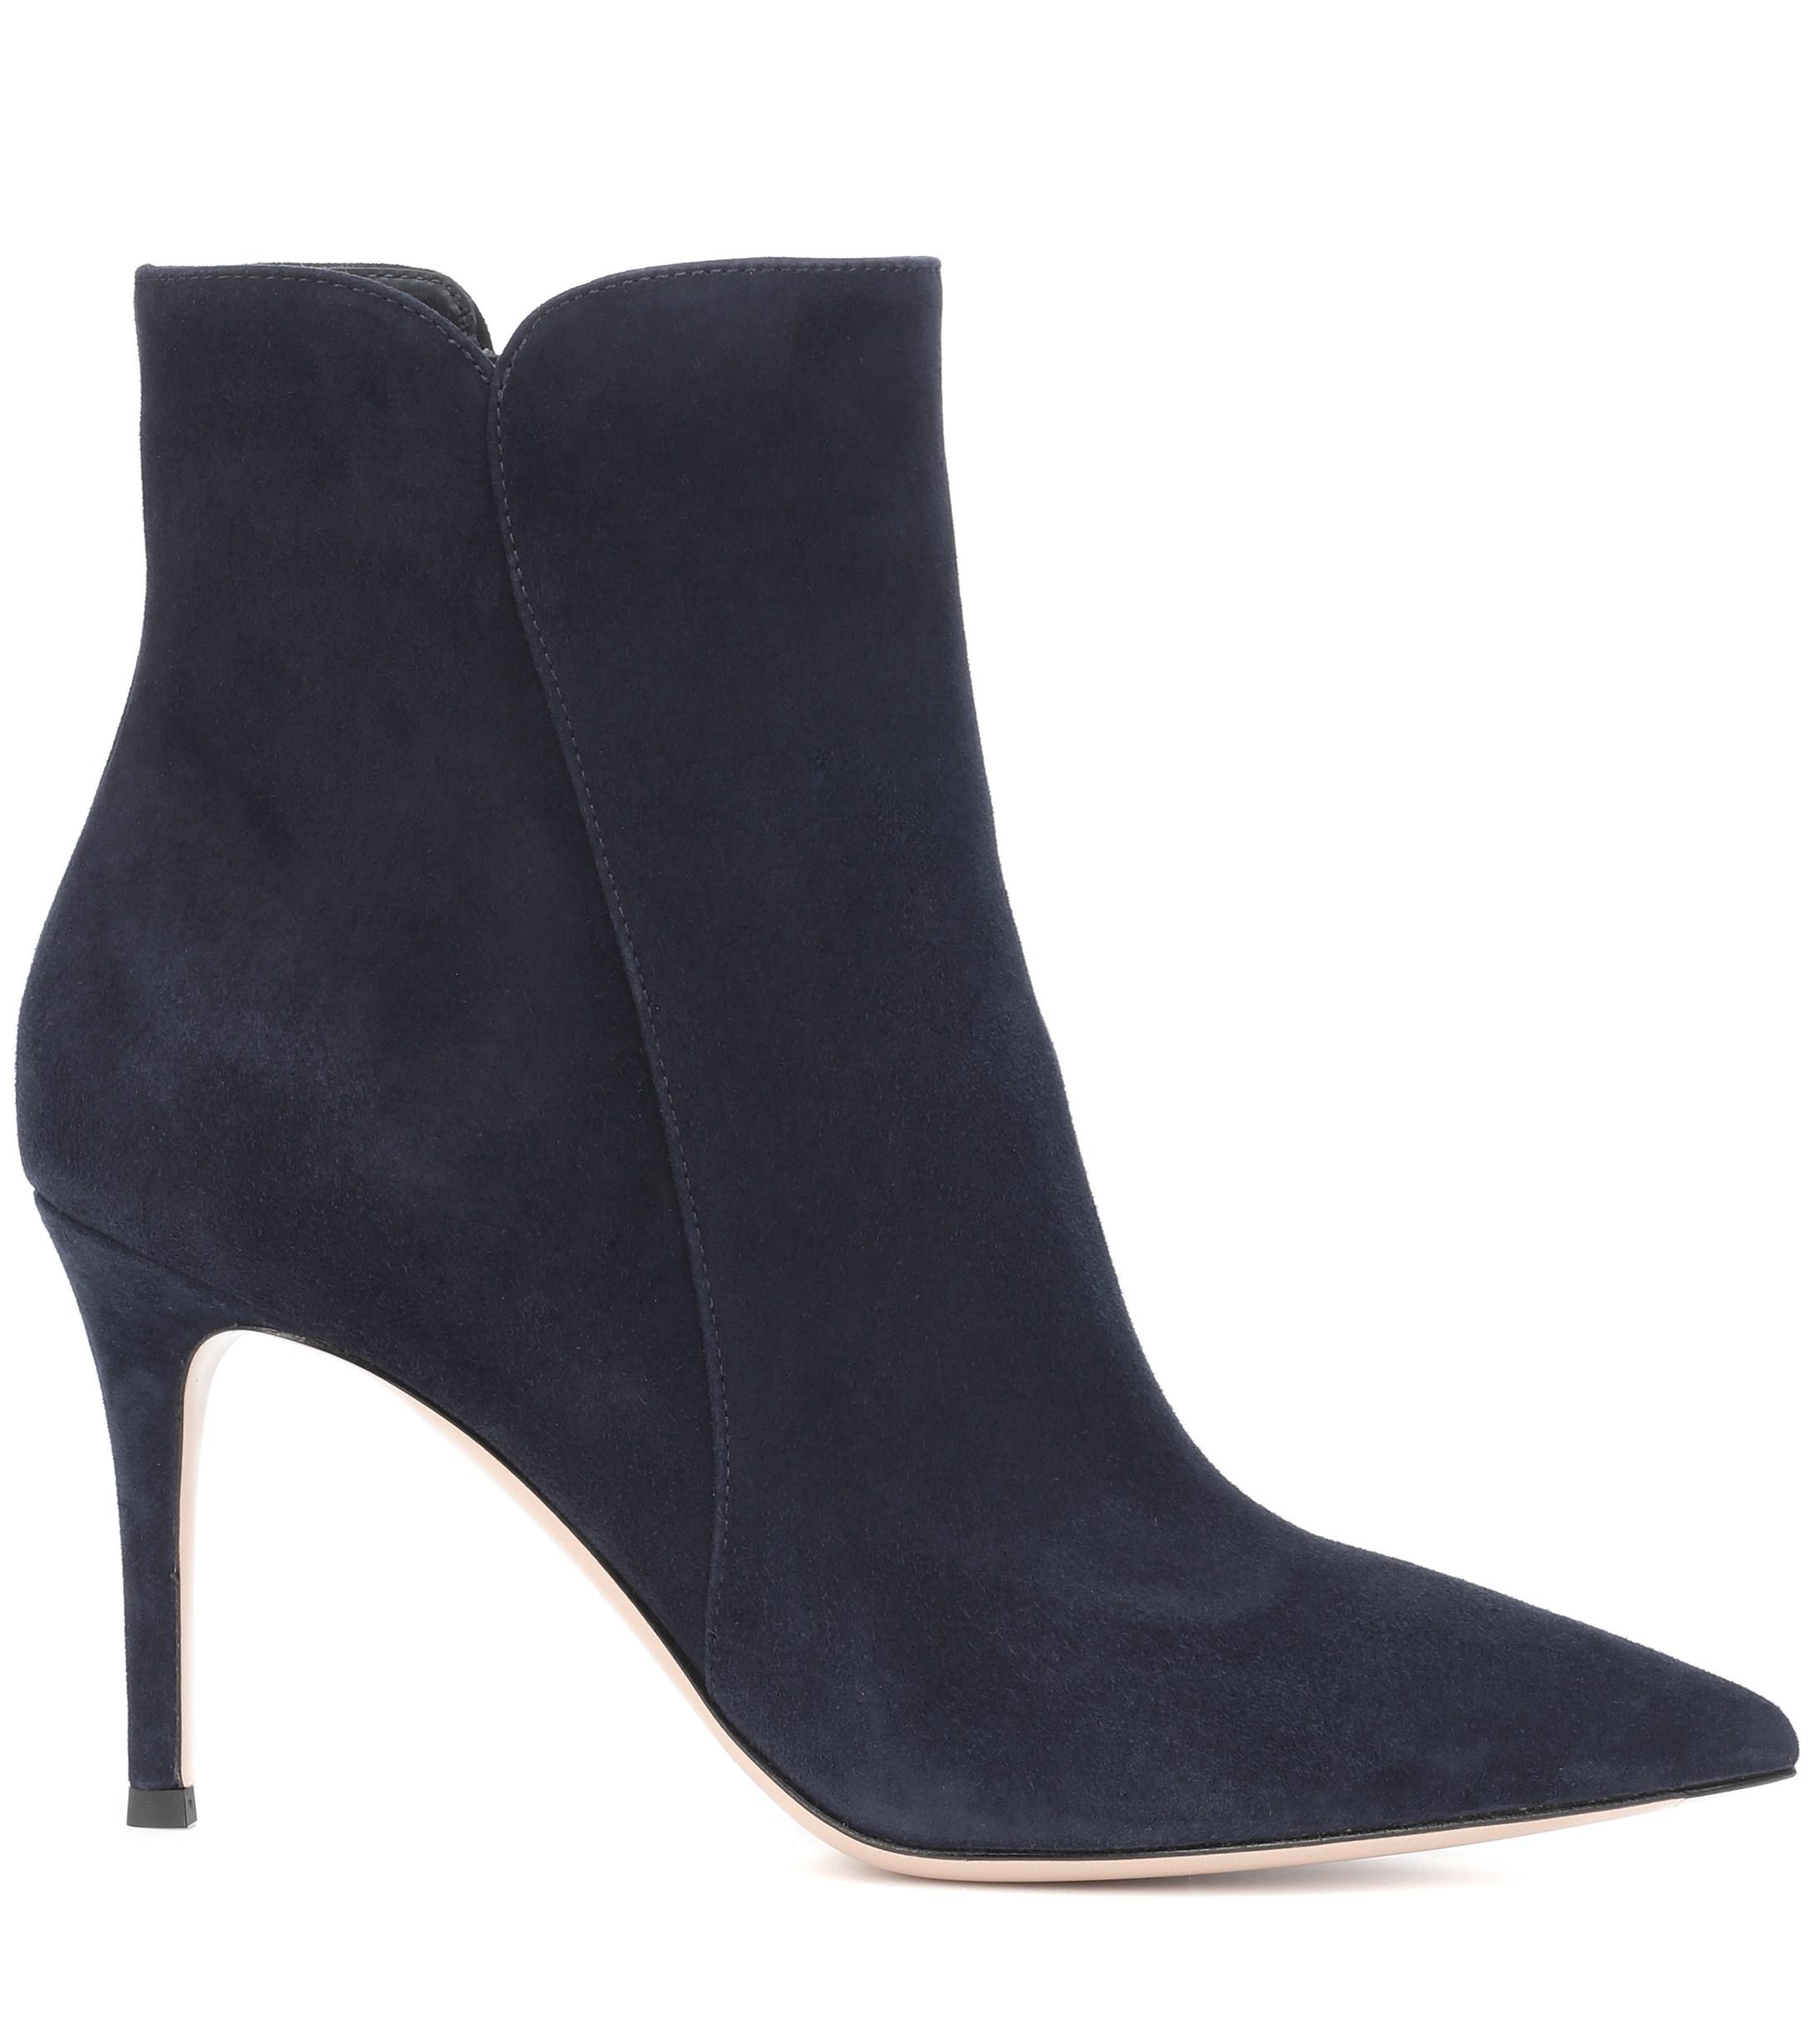 Gianvito Rossi Dana Suede Ankle Boots in Denim (Blue) - Lyst